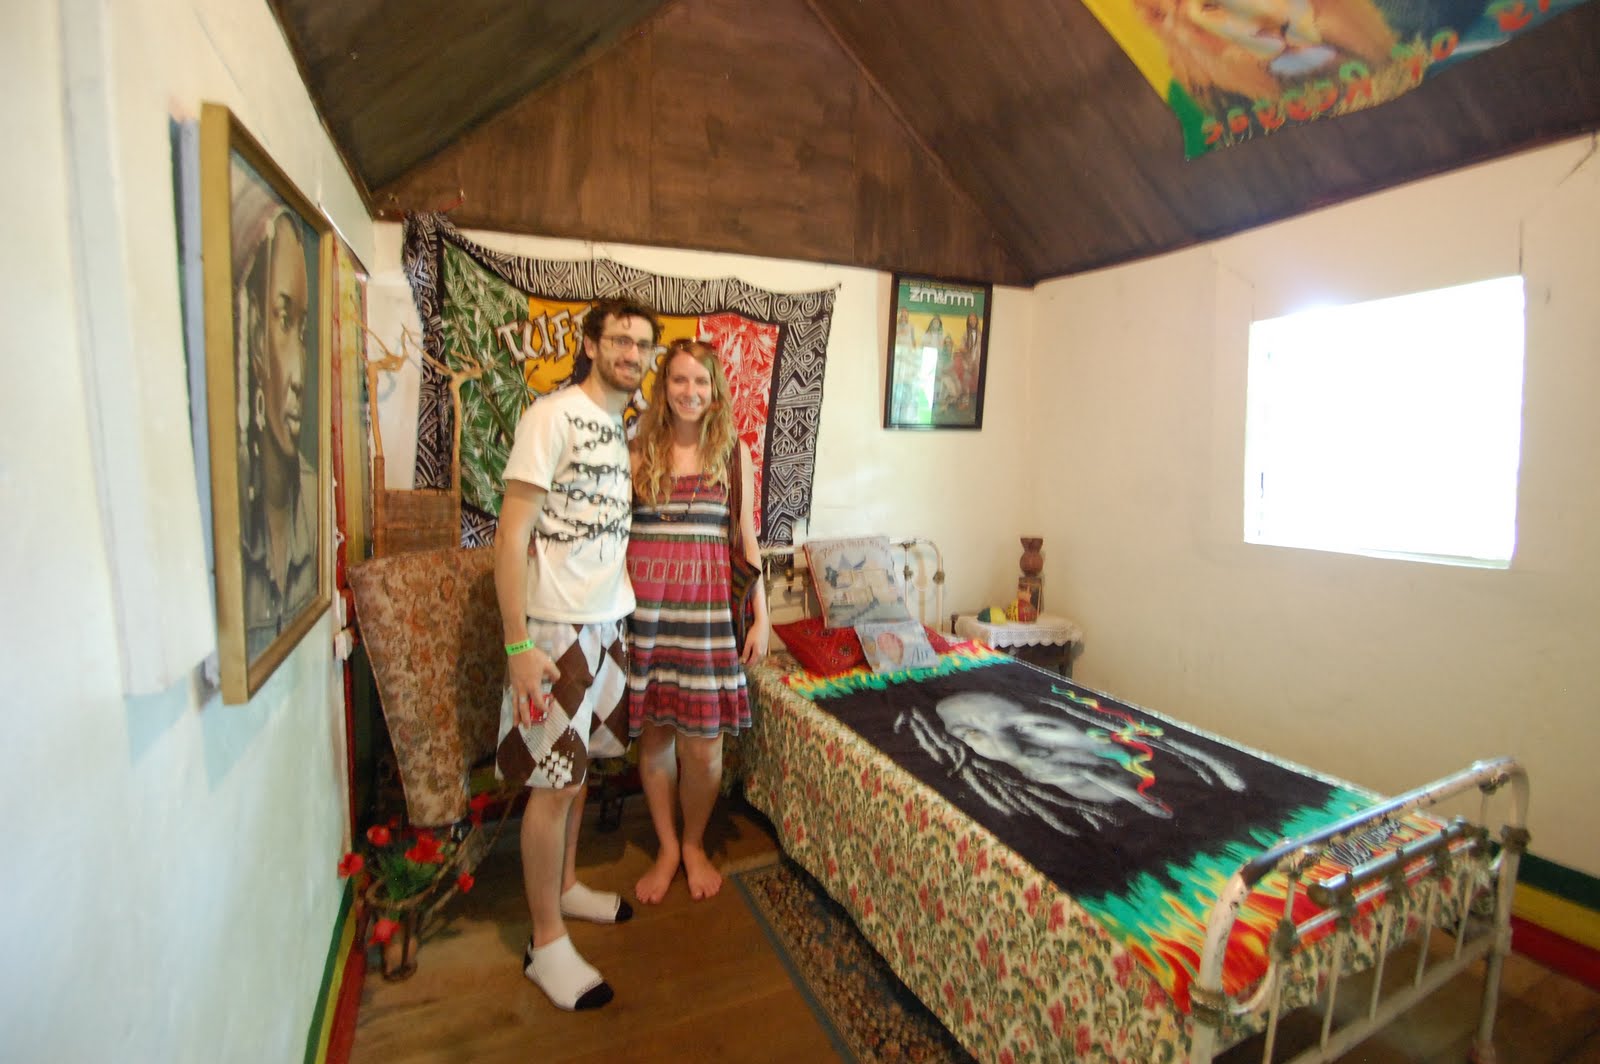 bob marley s bedroom we loved the bob marley tour definitely recommend ...